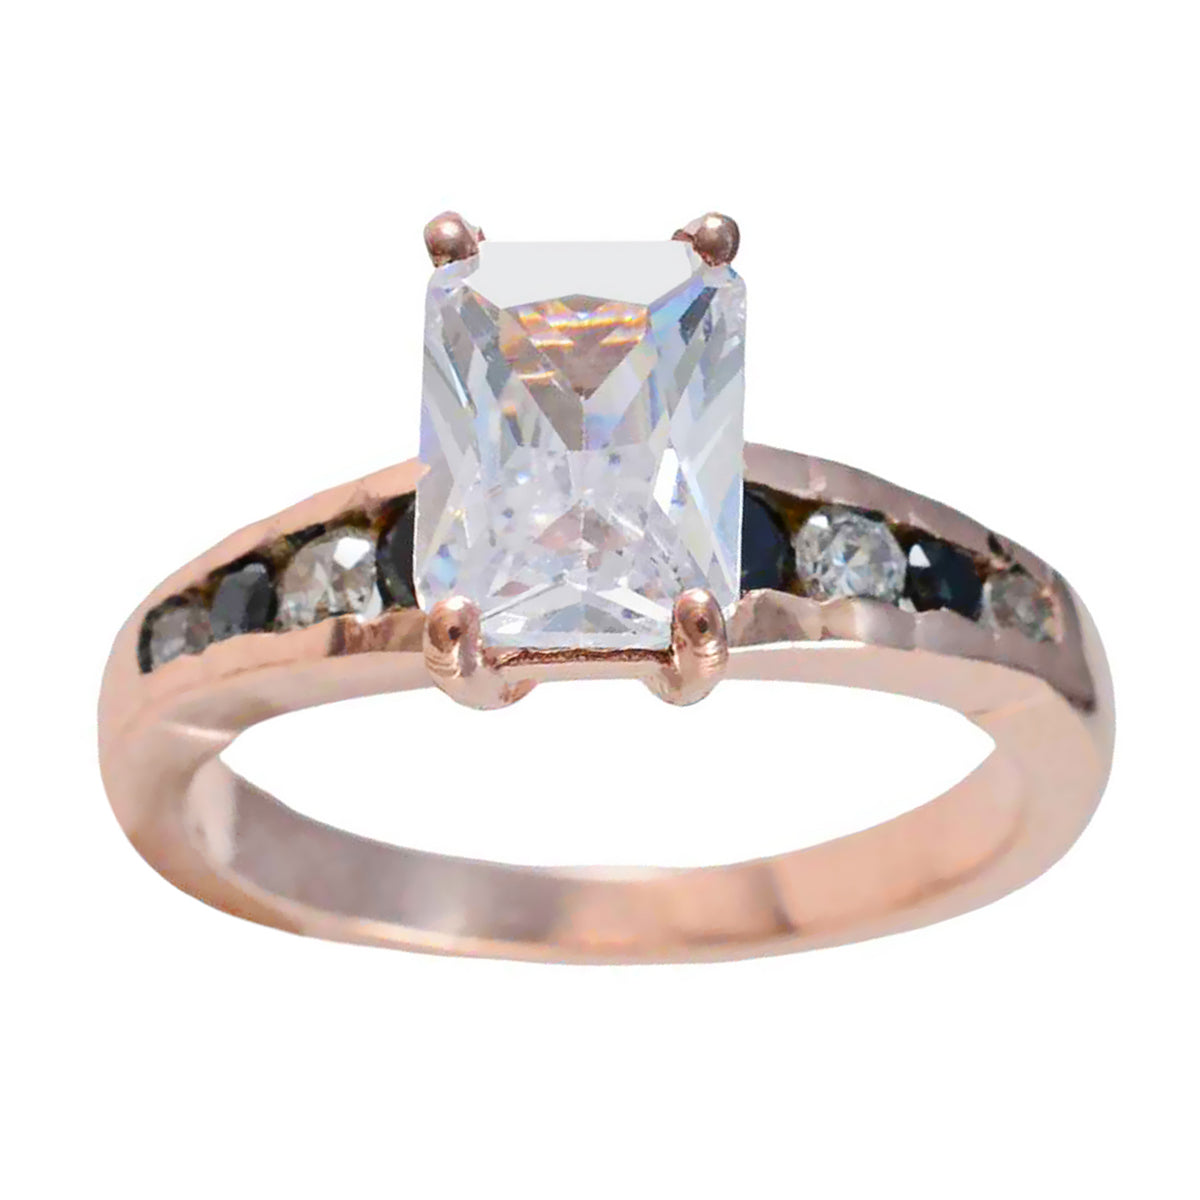 Riyo Adorable Silver Ring With Rose Gold Plating Blue Sapphire Stone Octagon Shape Prong Setting Stylish Jewelry Anniversary Ring